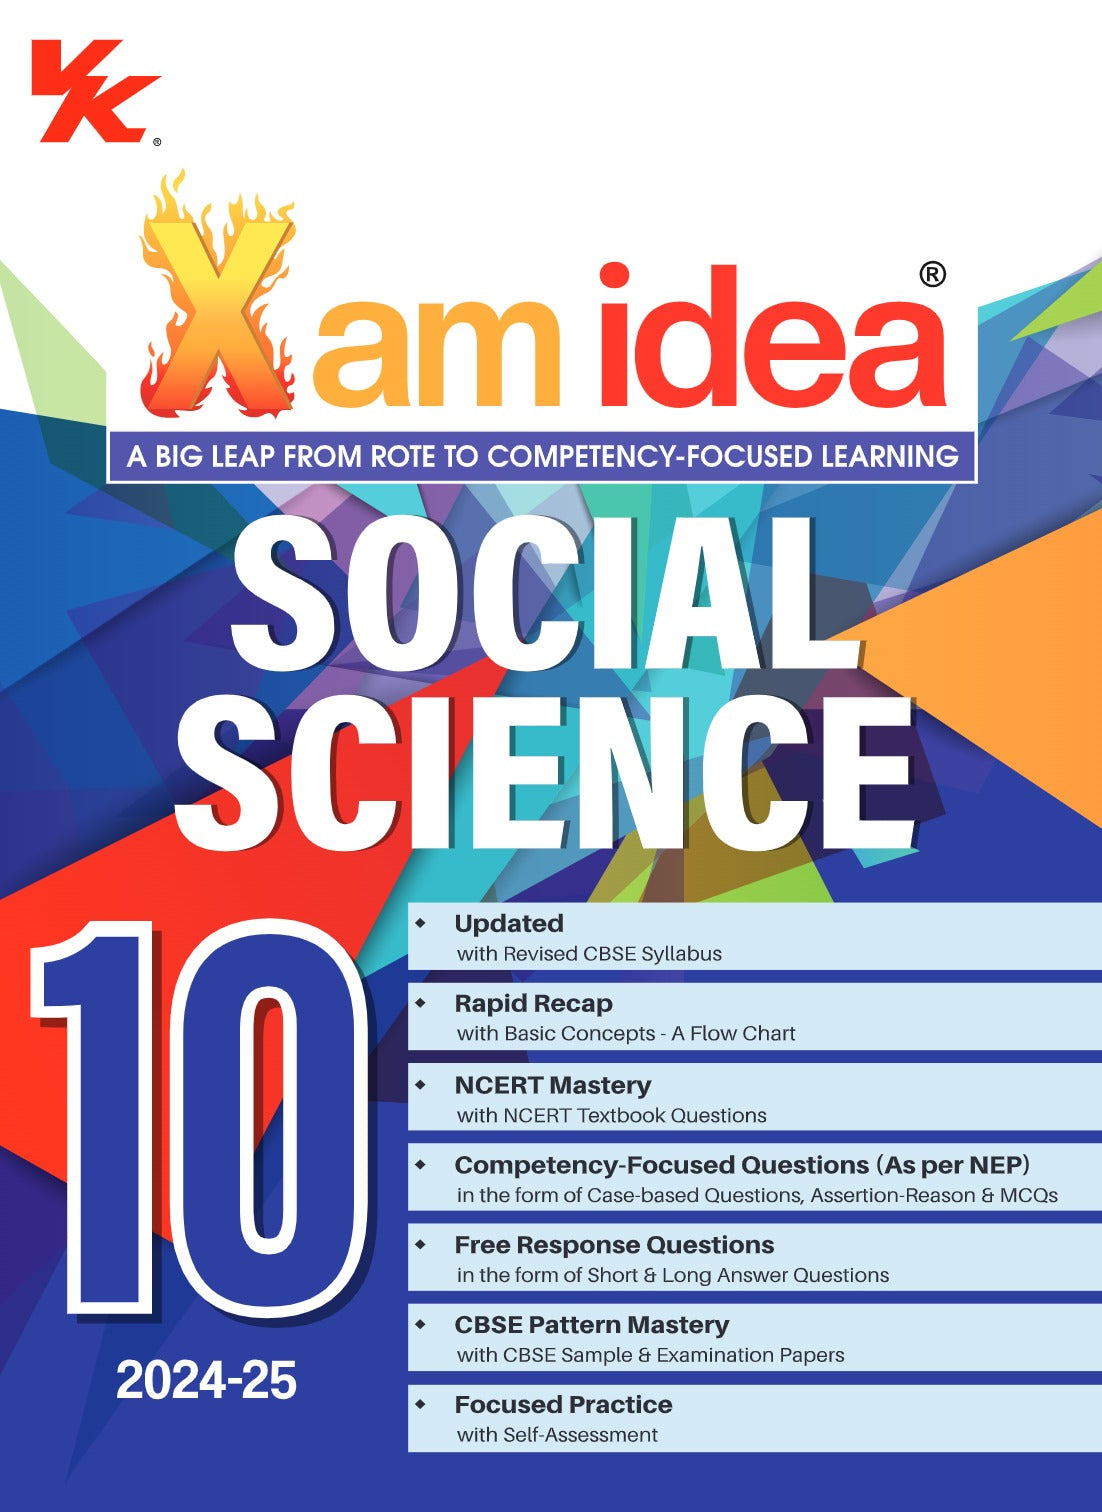 Xam idea Social Science Class 10 Book | CBSE Board | Chapterwise Question Bank | Based on Revised CBSE Syllabus | NCERT Questions Included | 2024-25 Exam